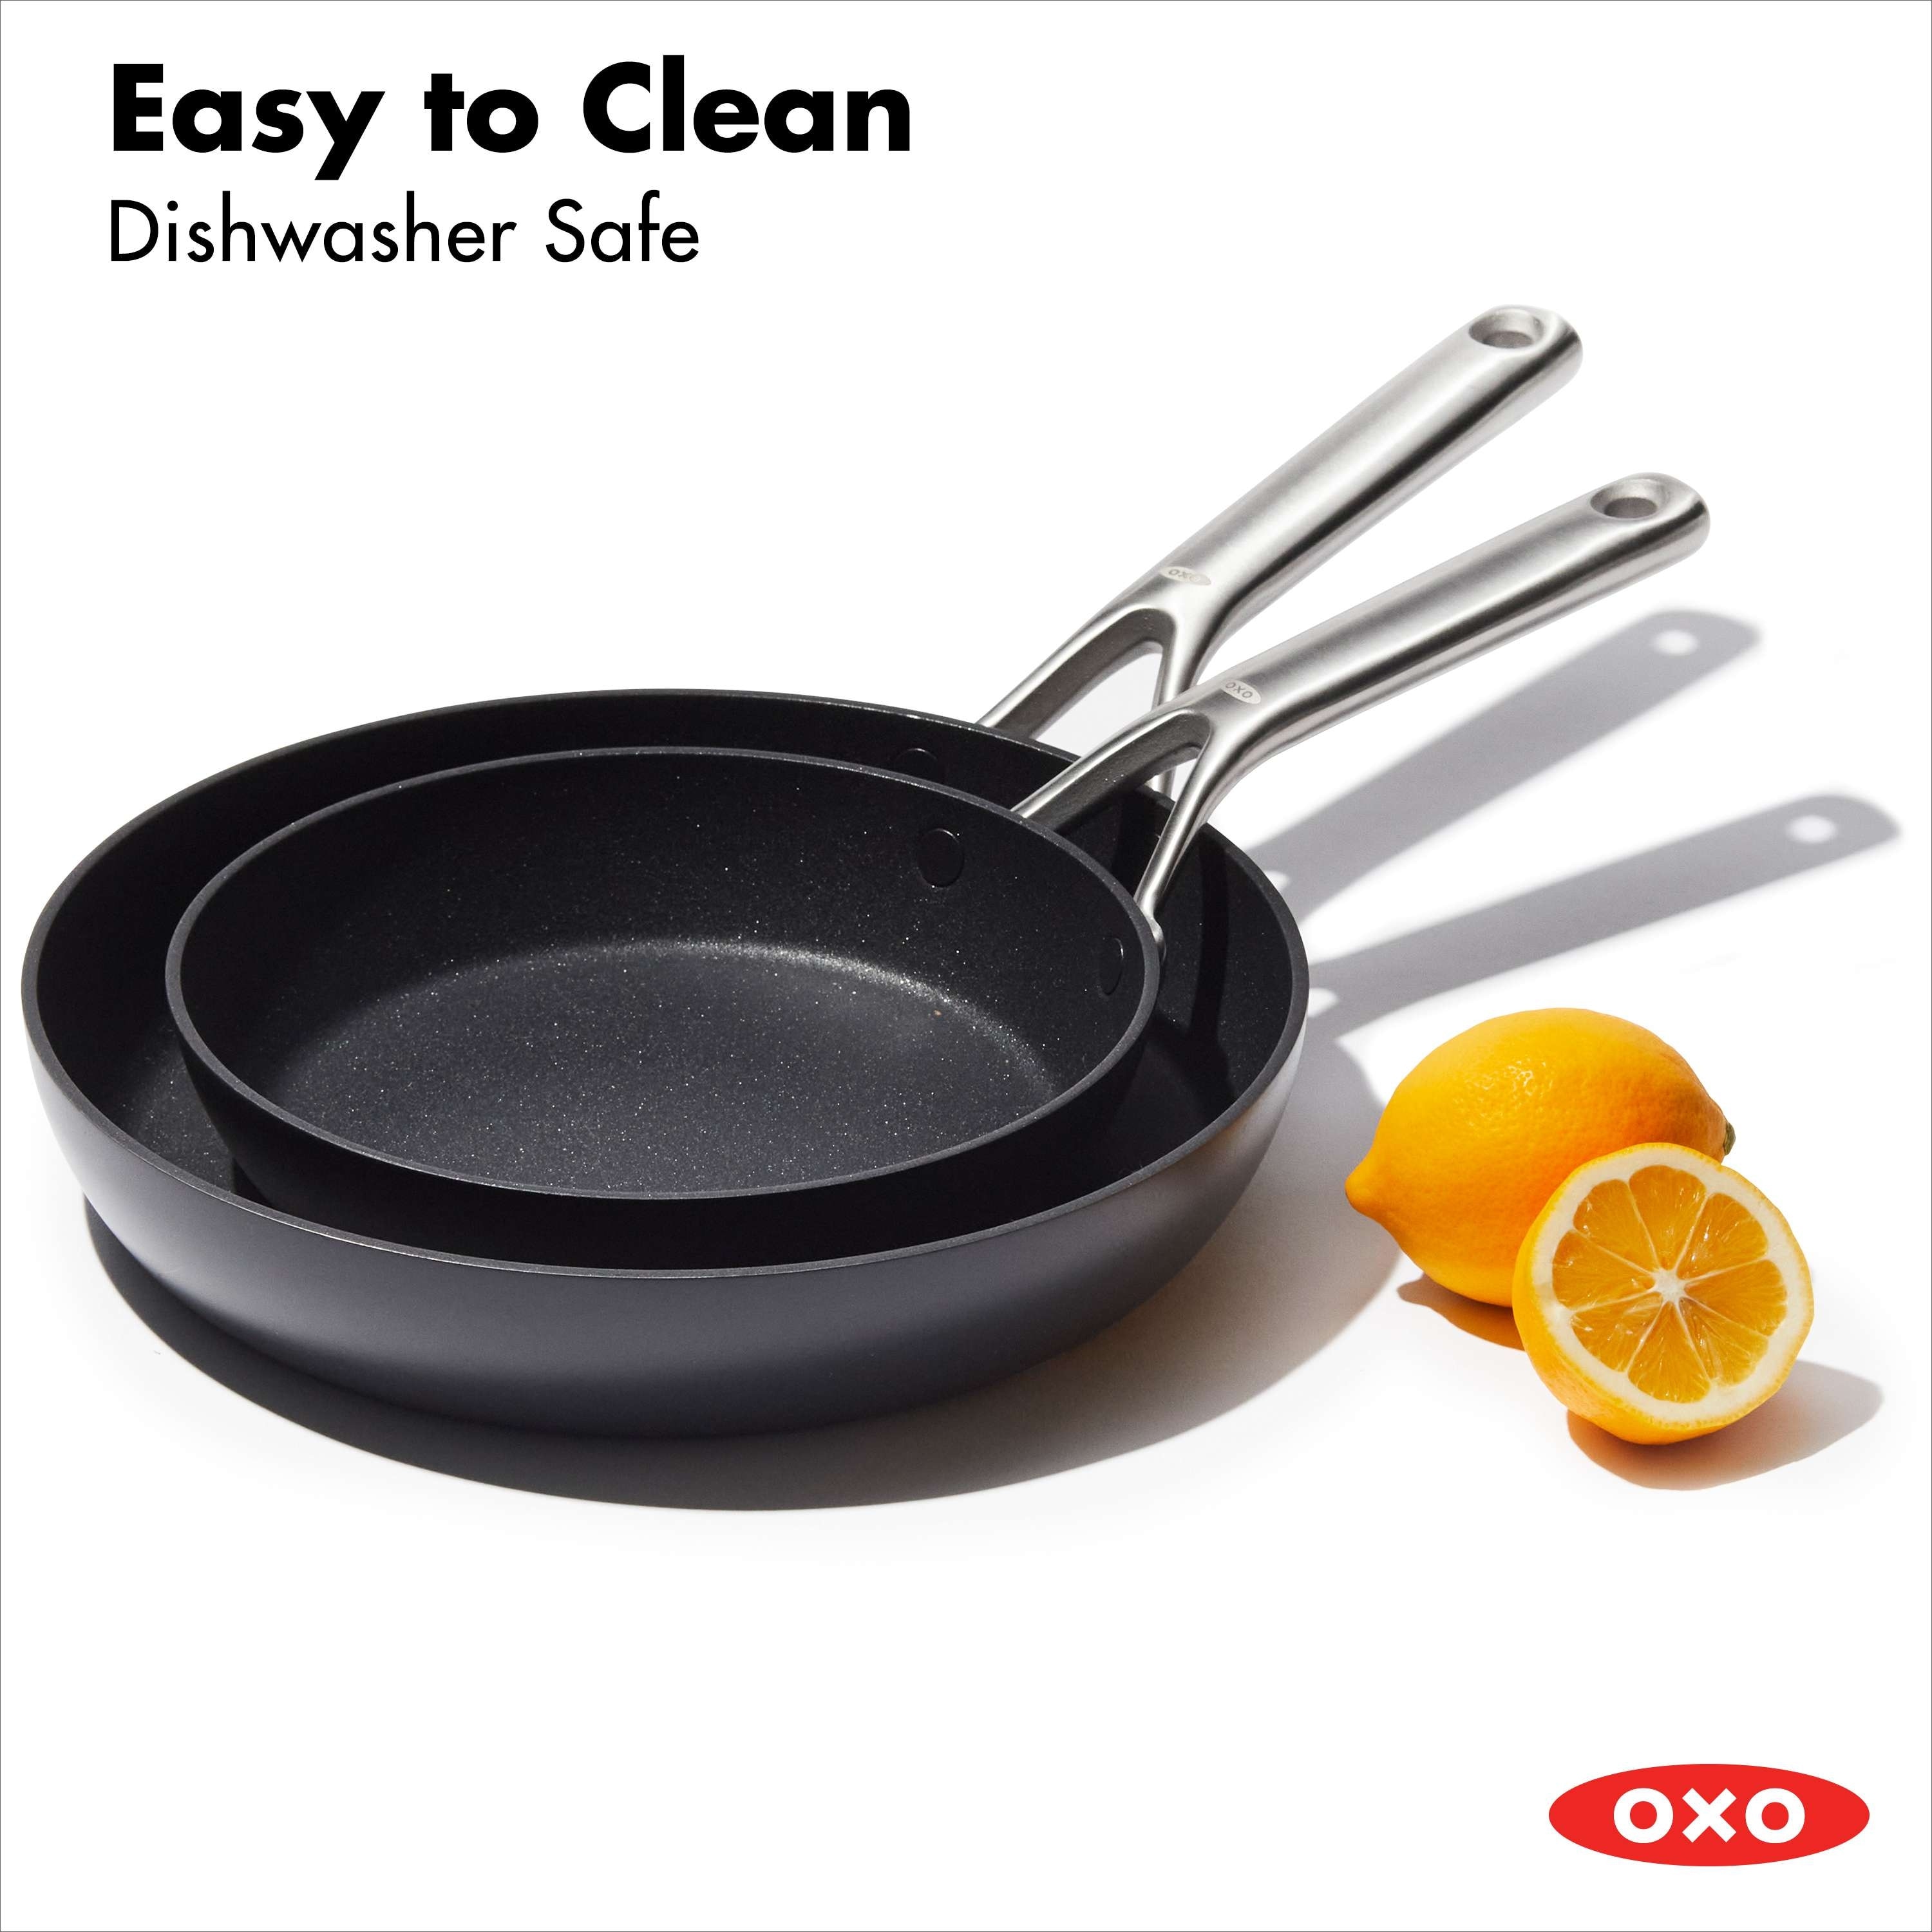 https://ak1.ostkcdn.com/images/products/is/images/direct/725f847540db2815b19cfd842d7b5a8651461998/OXO-Professional-Ceramic-Non-Stick-2-Piece-Frying-Pan-Set%2C-8-In-and-10-In.jpg